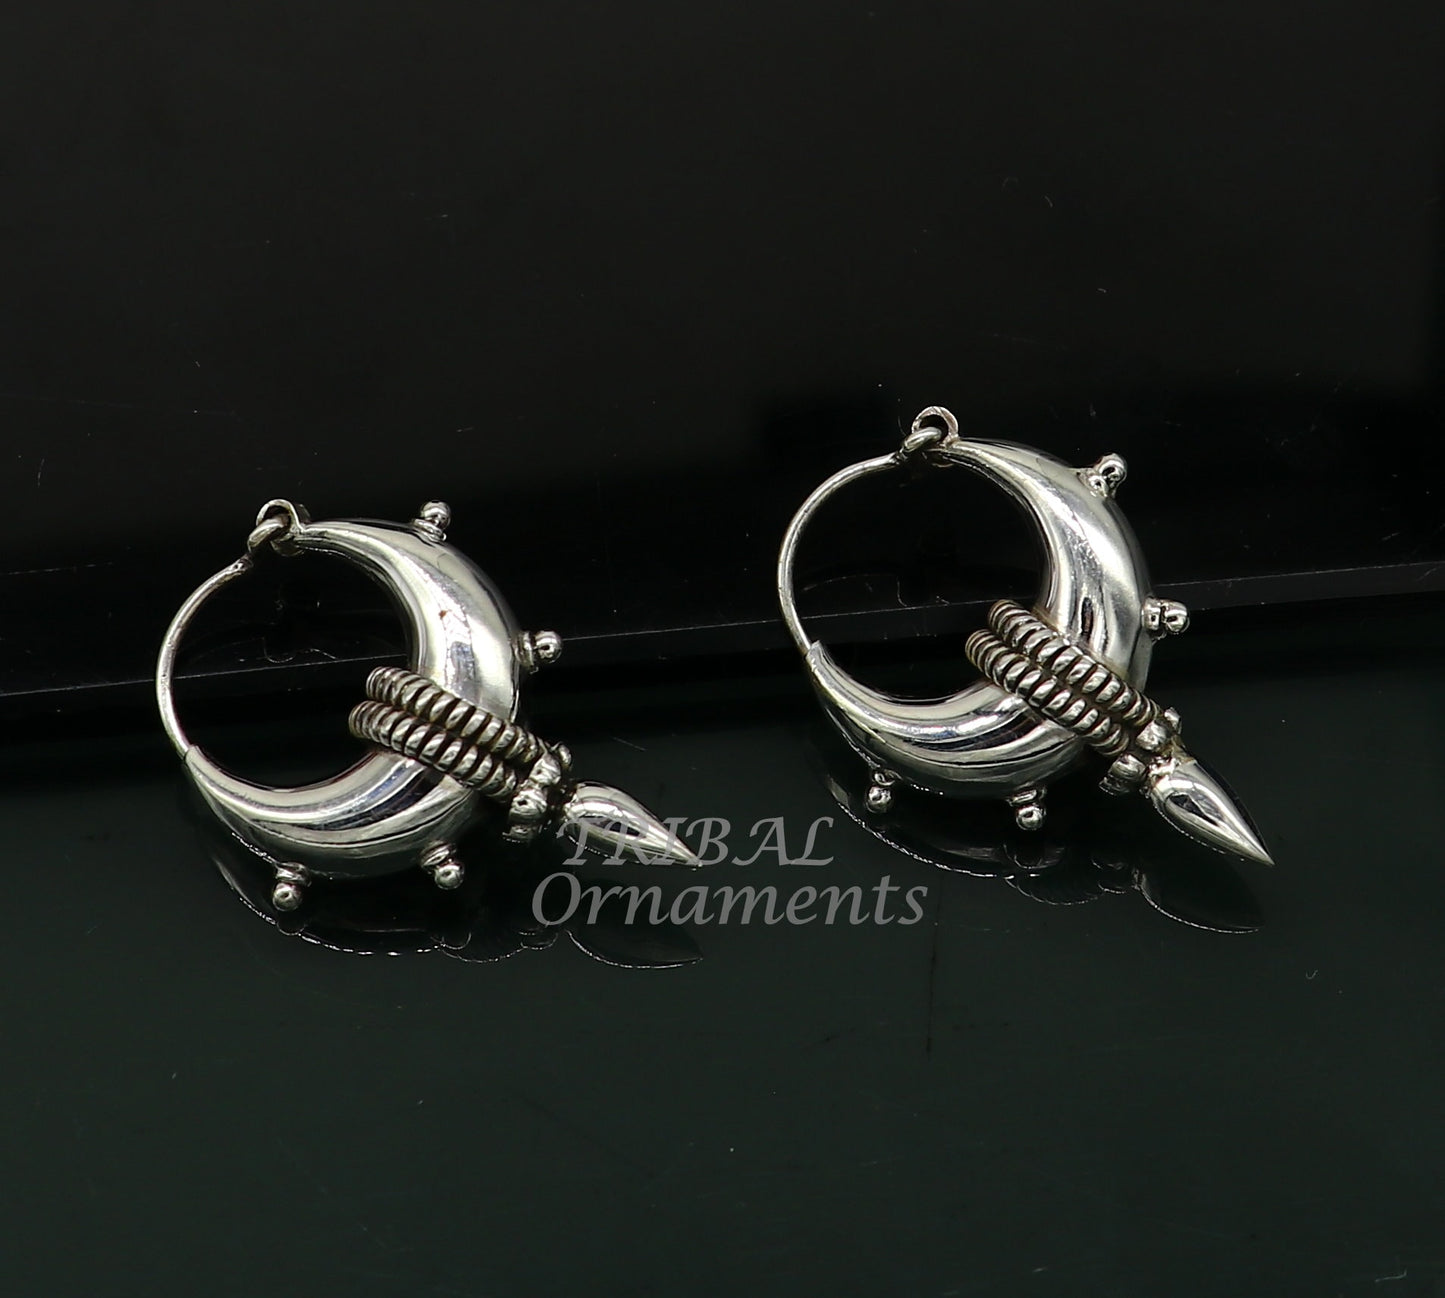 925 sterling silver handmade unique traditional cultural ethnic hoops earring bali for men's or girl's best dancing jewelry s1123 - TRIBAL ORNAMENTS